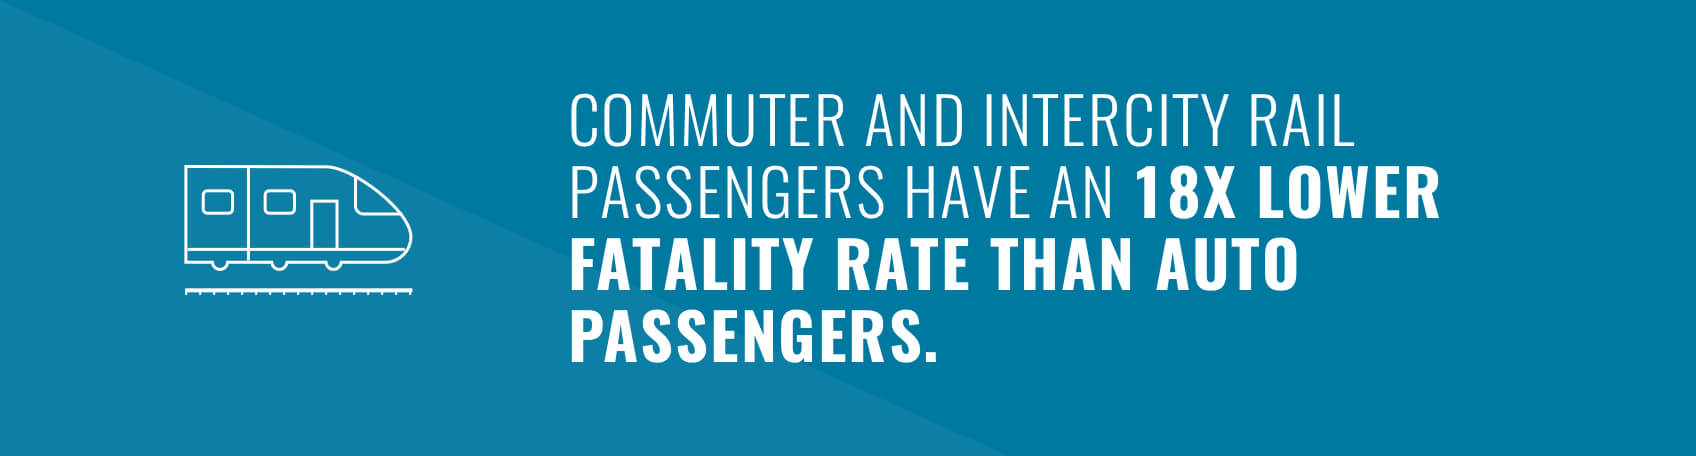 Commuter and Intercity Rail Passengers have an 18X Lower Fatality Rate than Auto Passengers